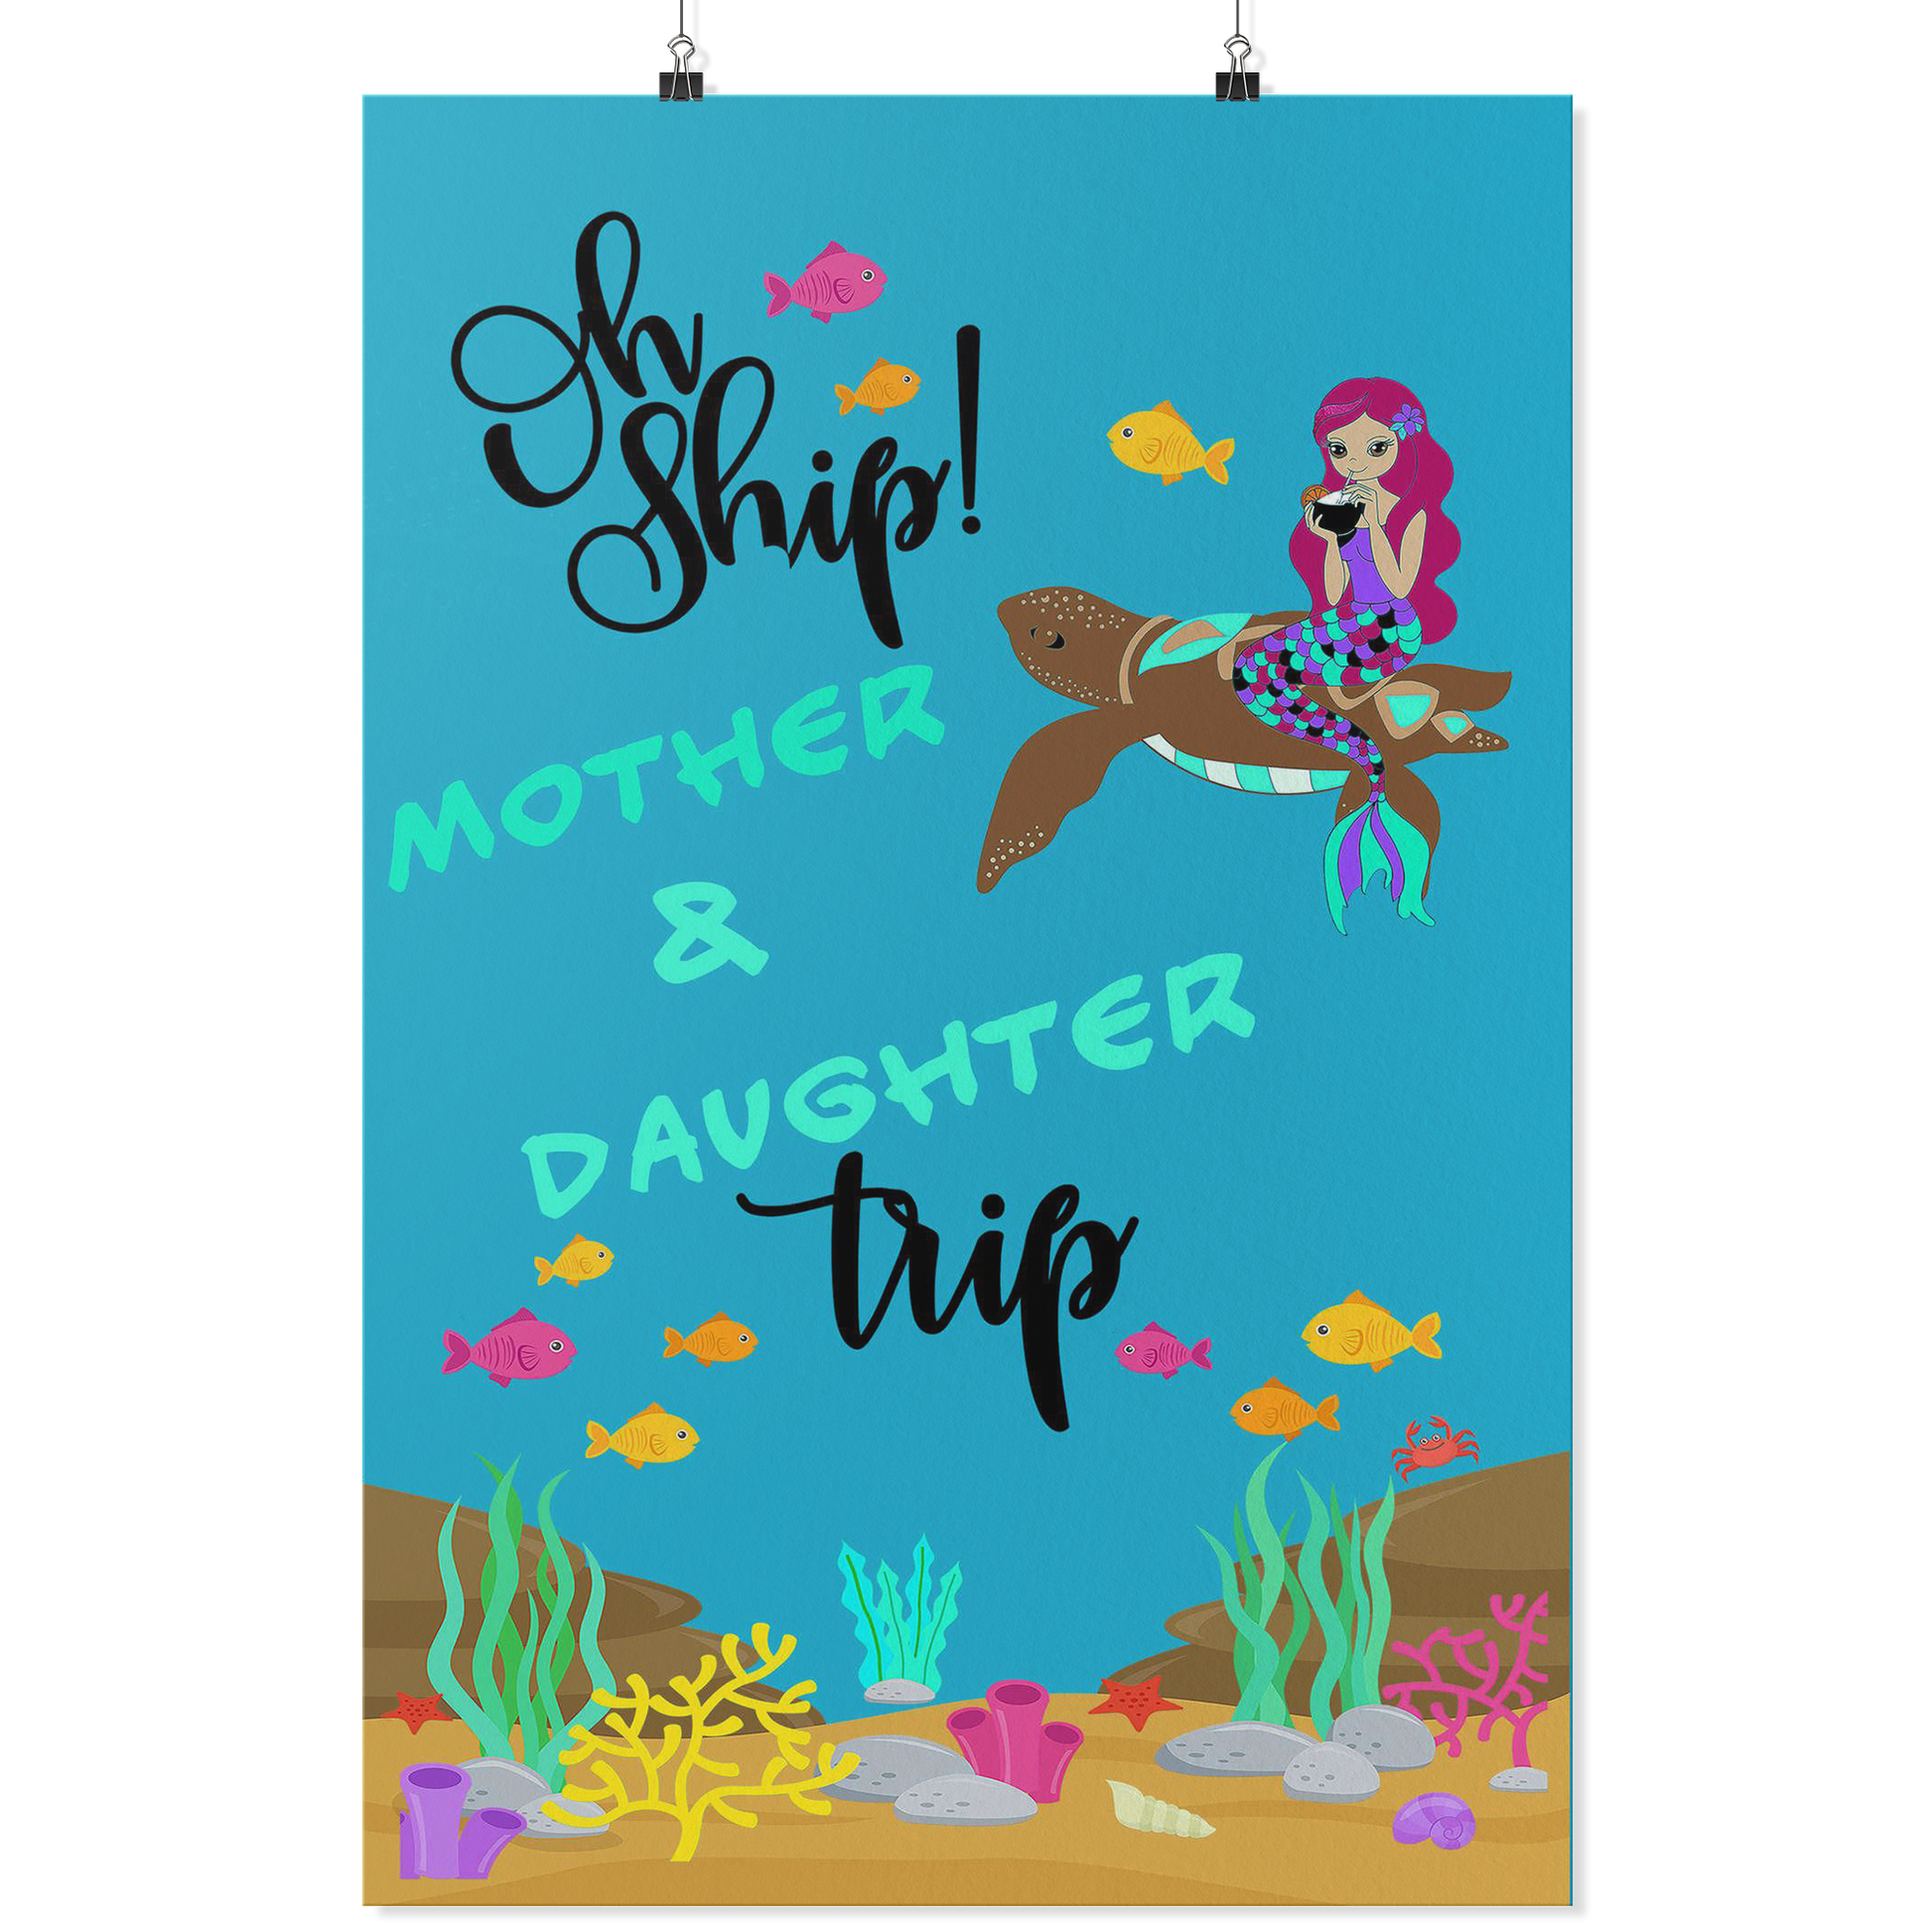 Cruise Vacation | Mother & Daughter Trip Cruise Ship Door Poster | Cruise Life - Poster